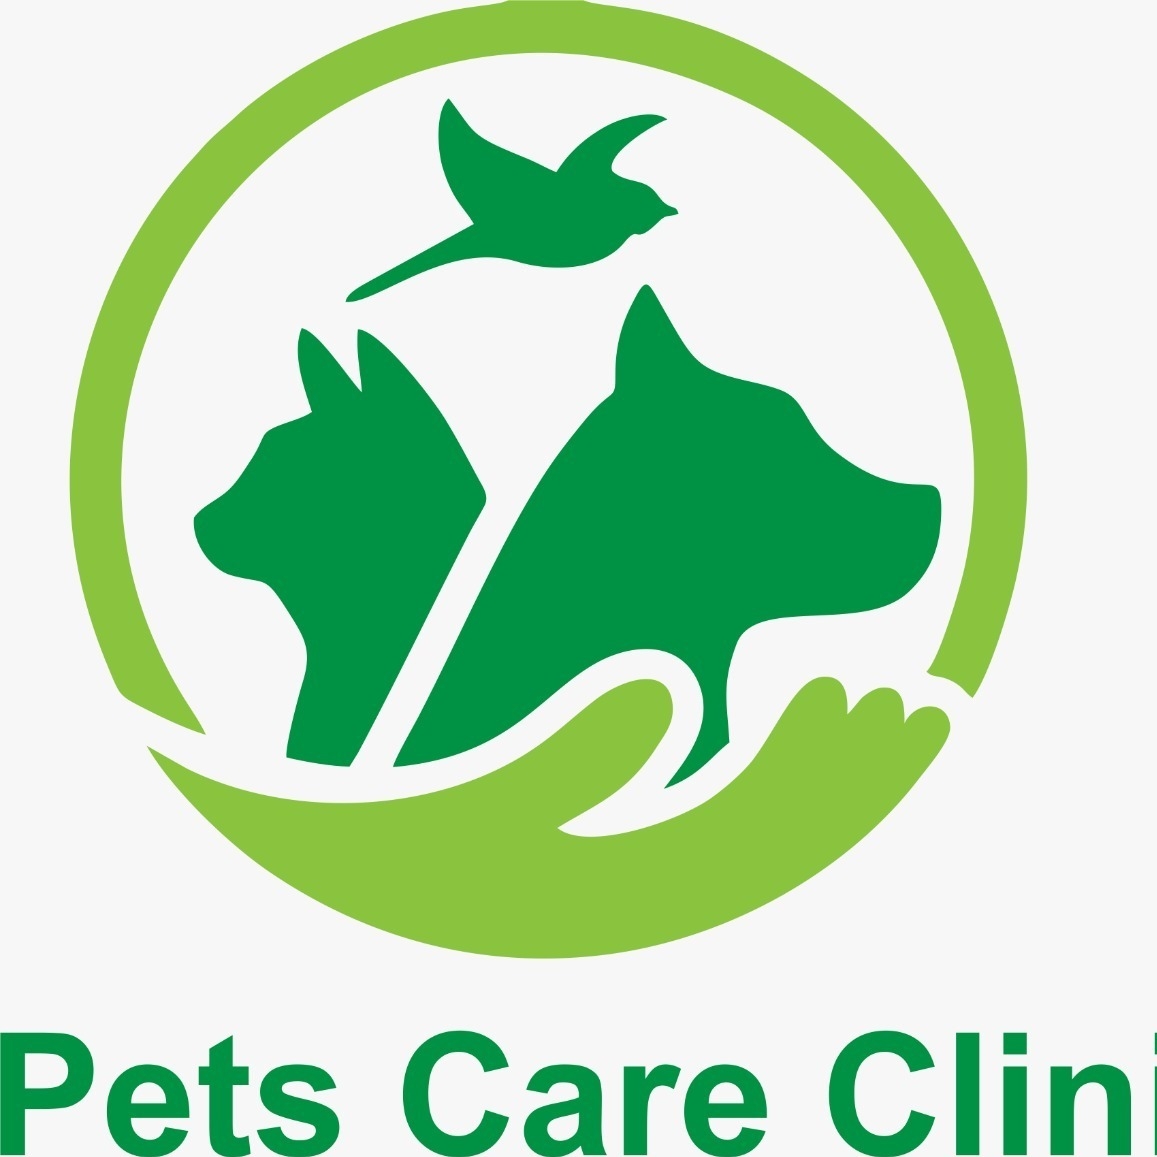 Pets Care Clinic|Veterinary|Medical Services